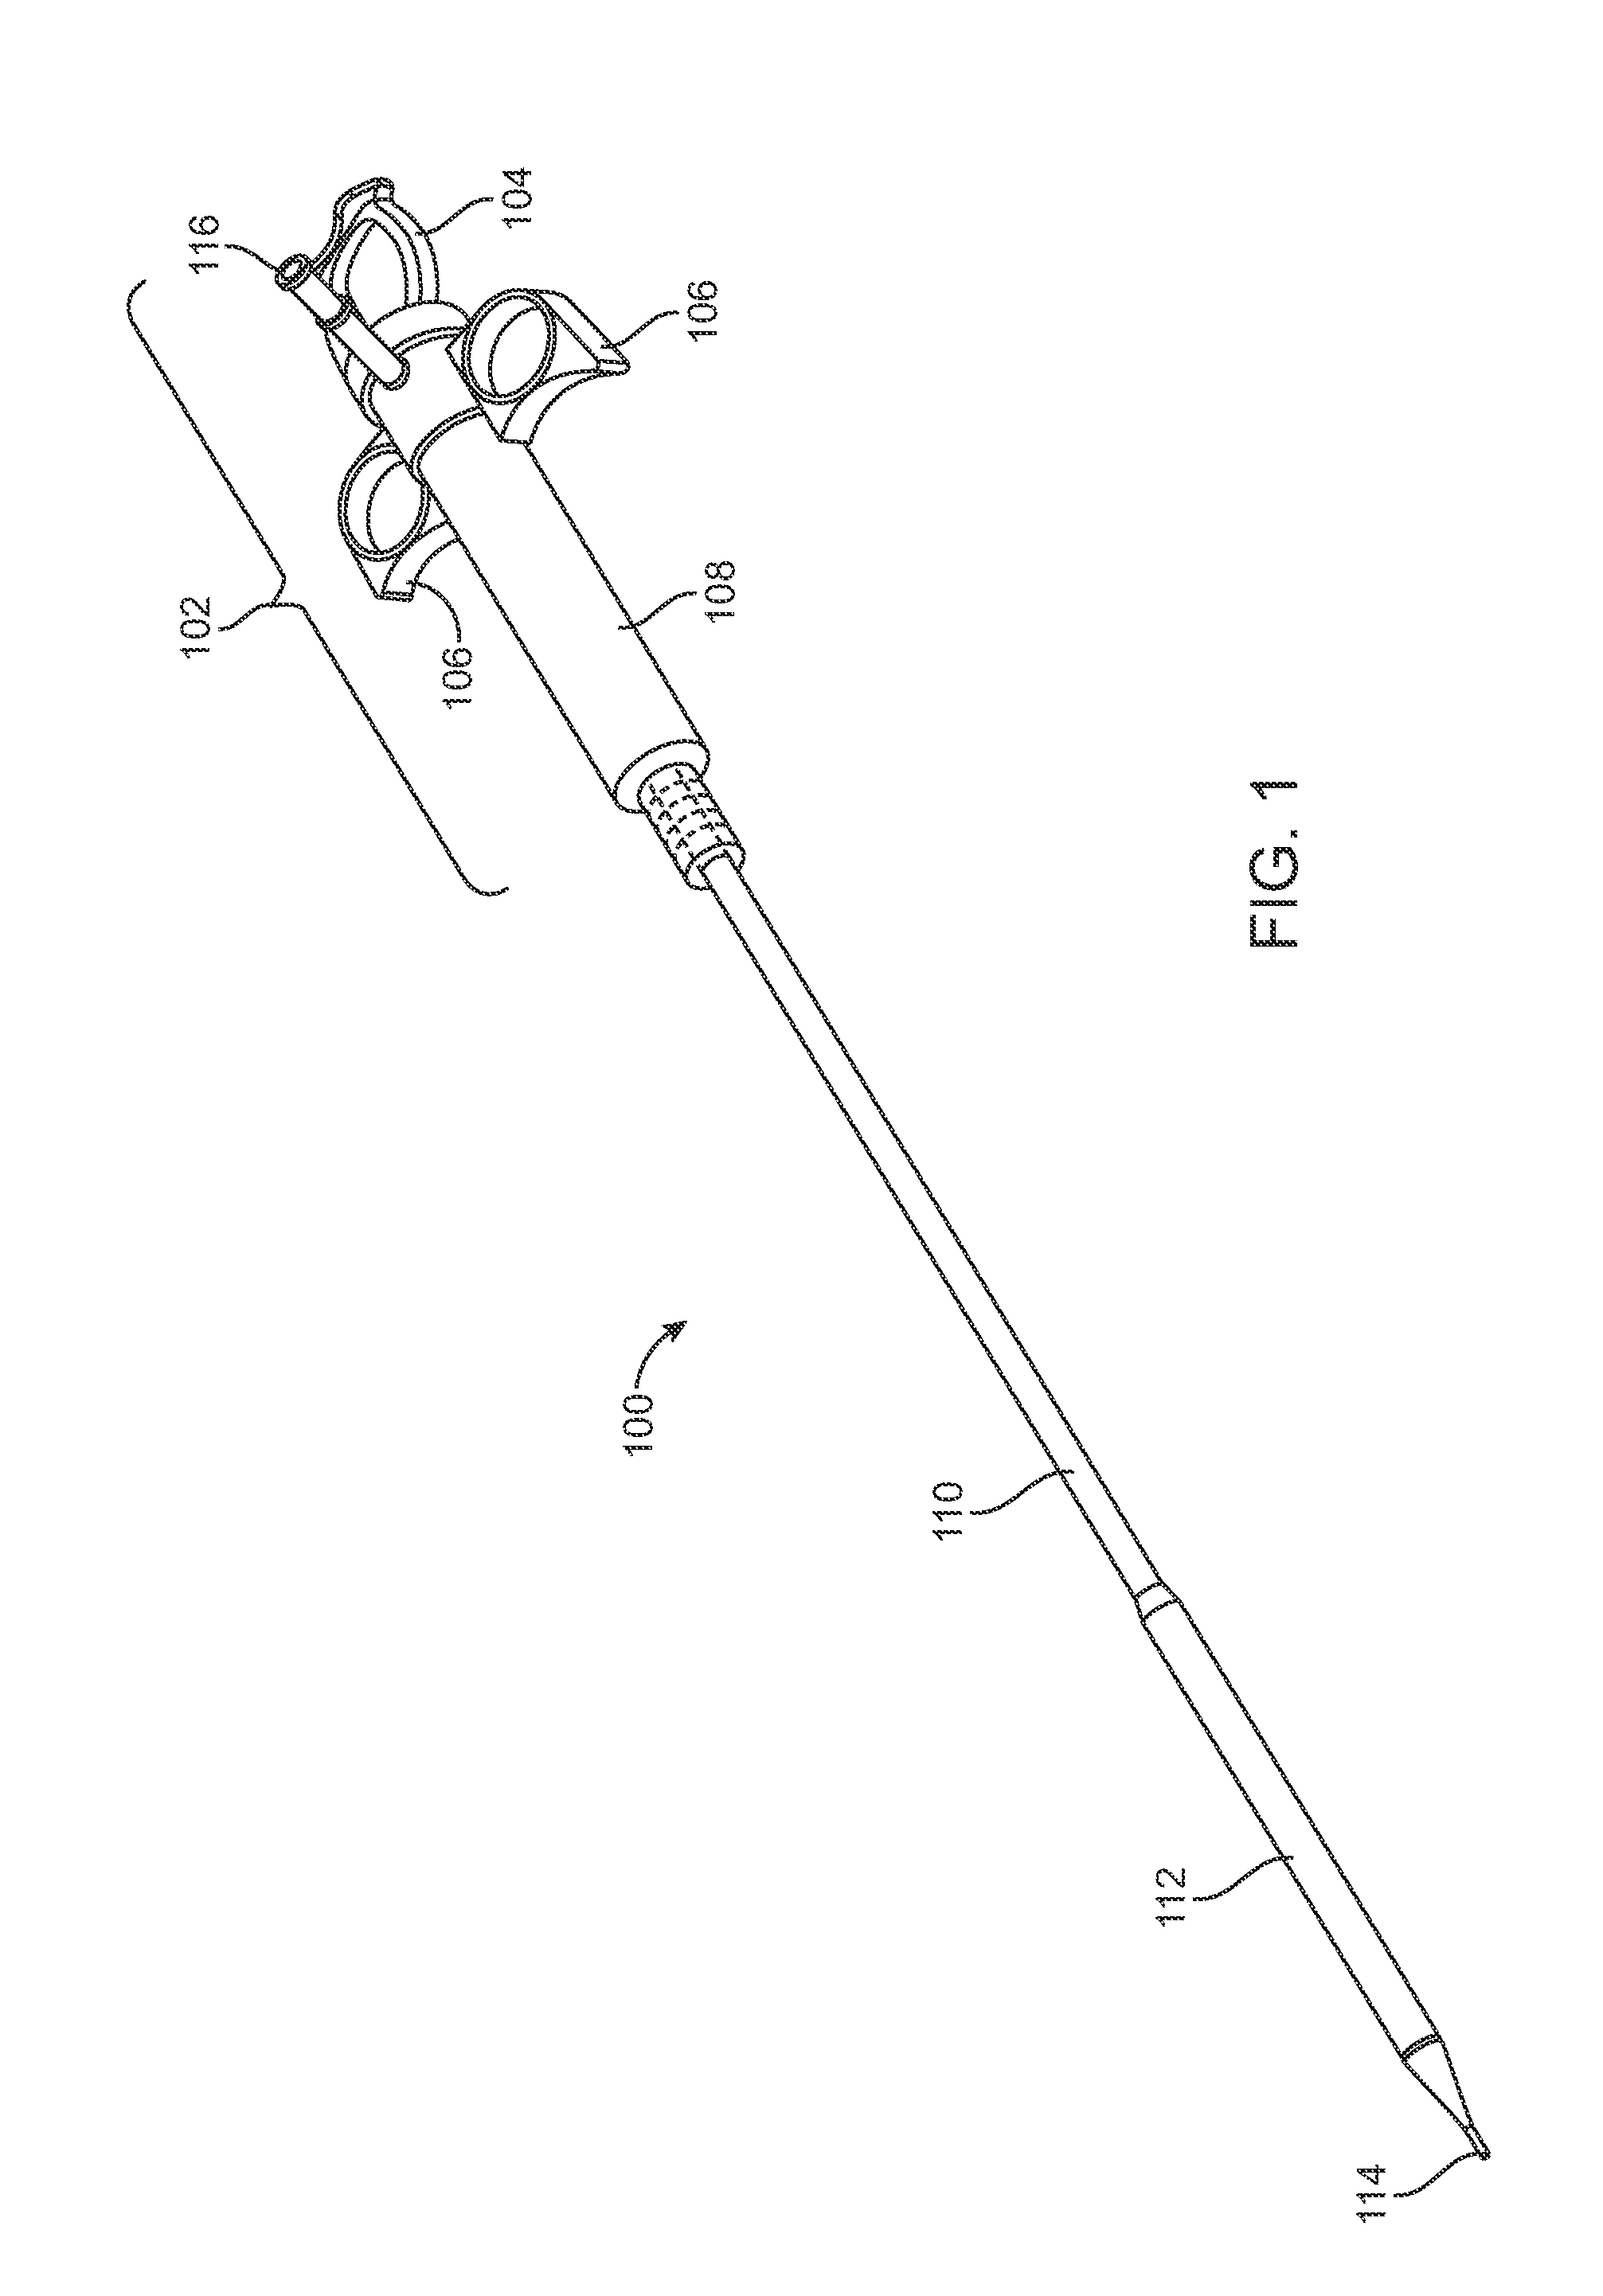 Trans-Aortic Surgical Syringe-Type Device for Deployment of a Prosthetic Valve